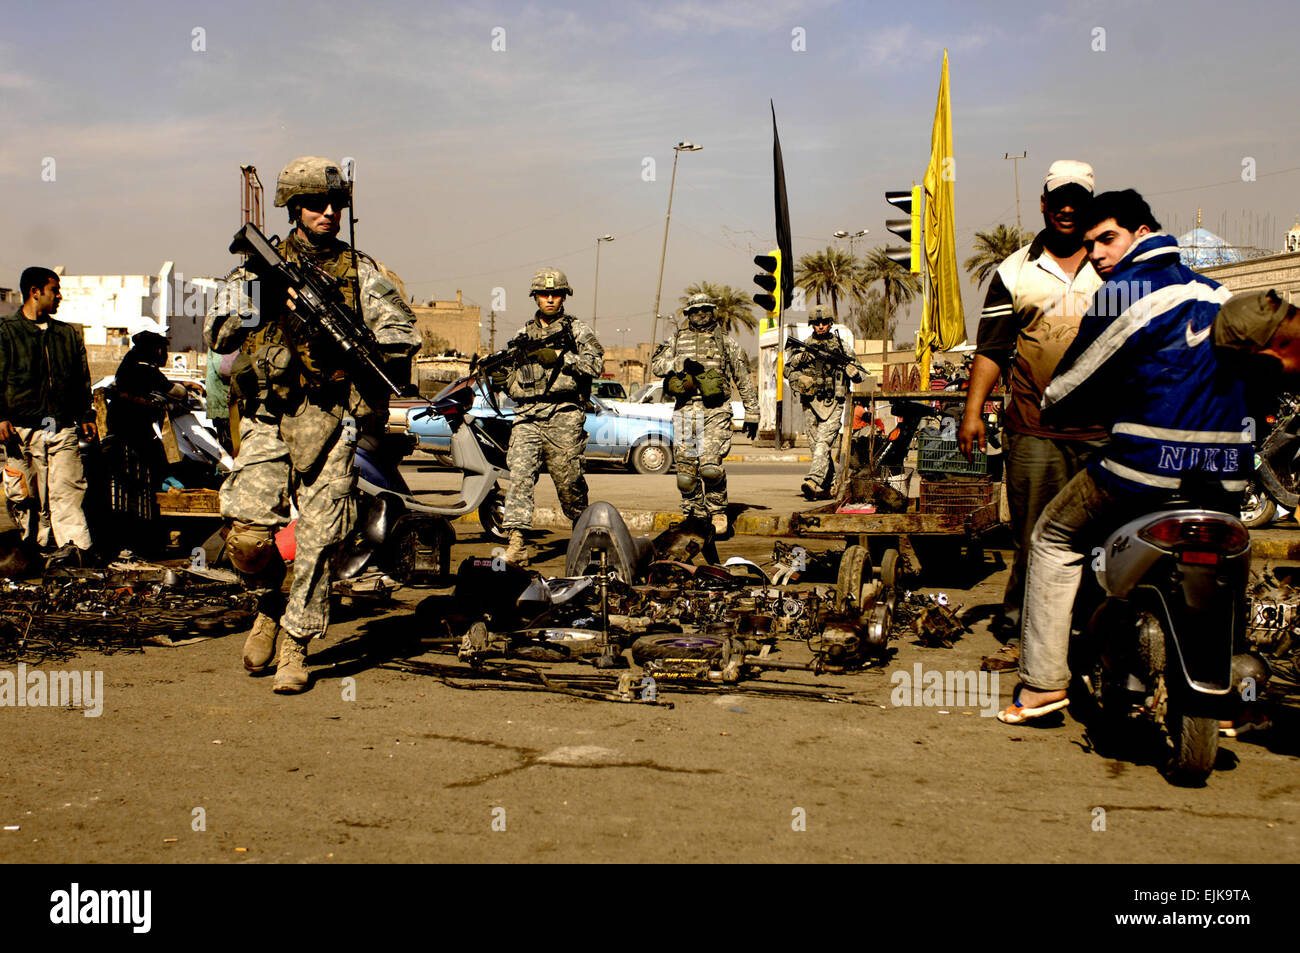 U.S. Army Soldiers assigned to 3rd Platoon, Charlie Company, 1st Battalion, 504th Parachute Infantry Regiment patrol Rusafa, Baghdad, Iraq, Feb. 17, 2008.  Staff Sgt. Jason T. Bailey Released Stock Photo